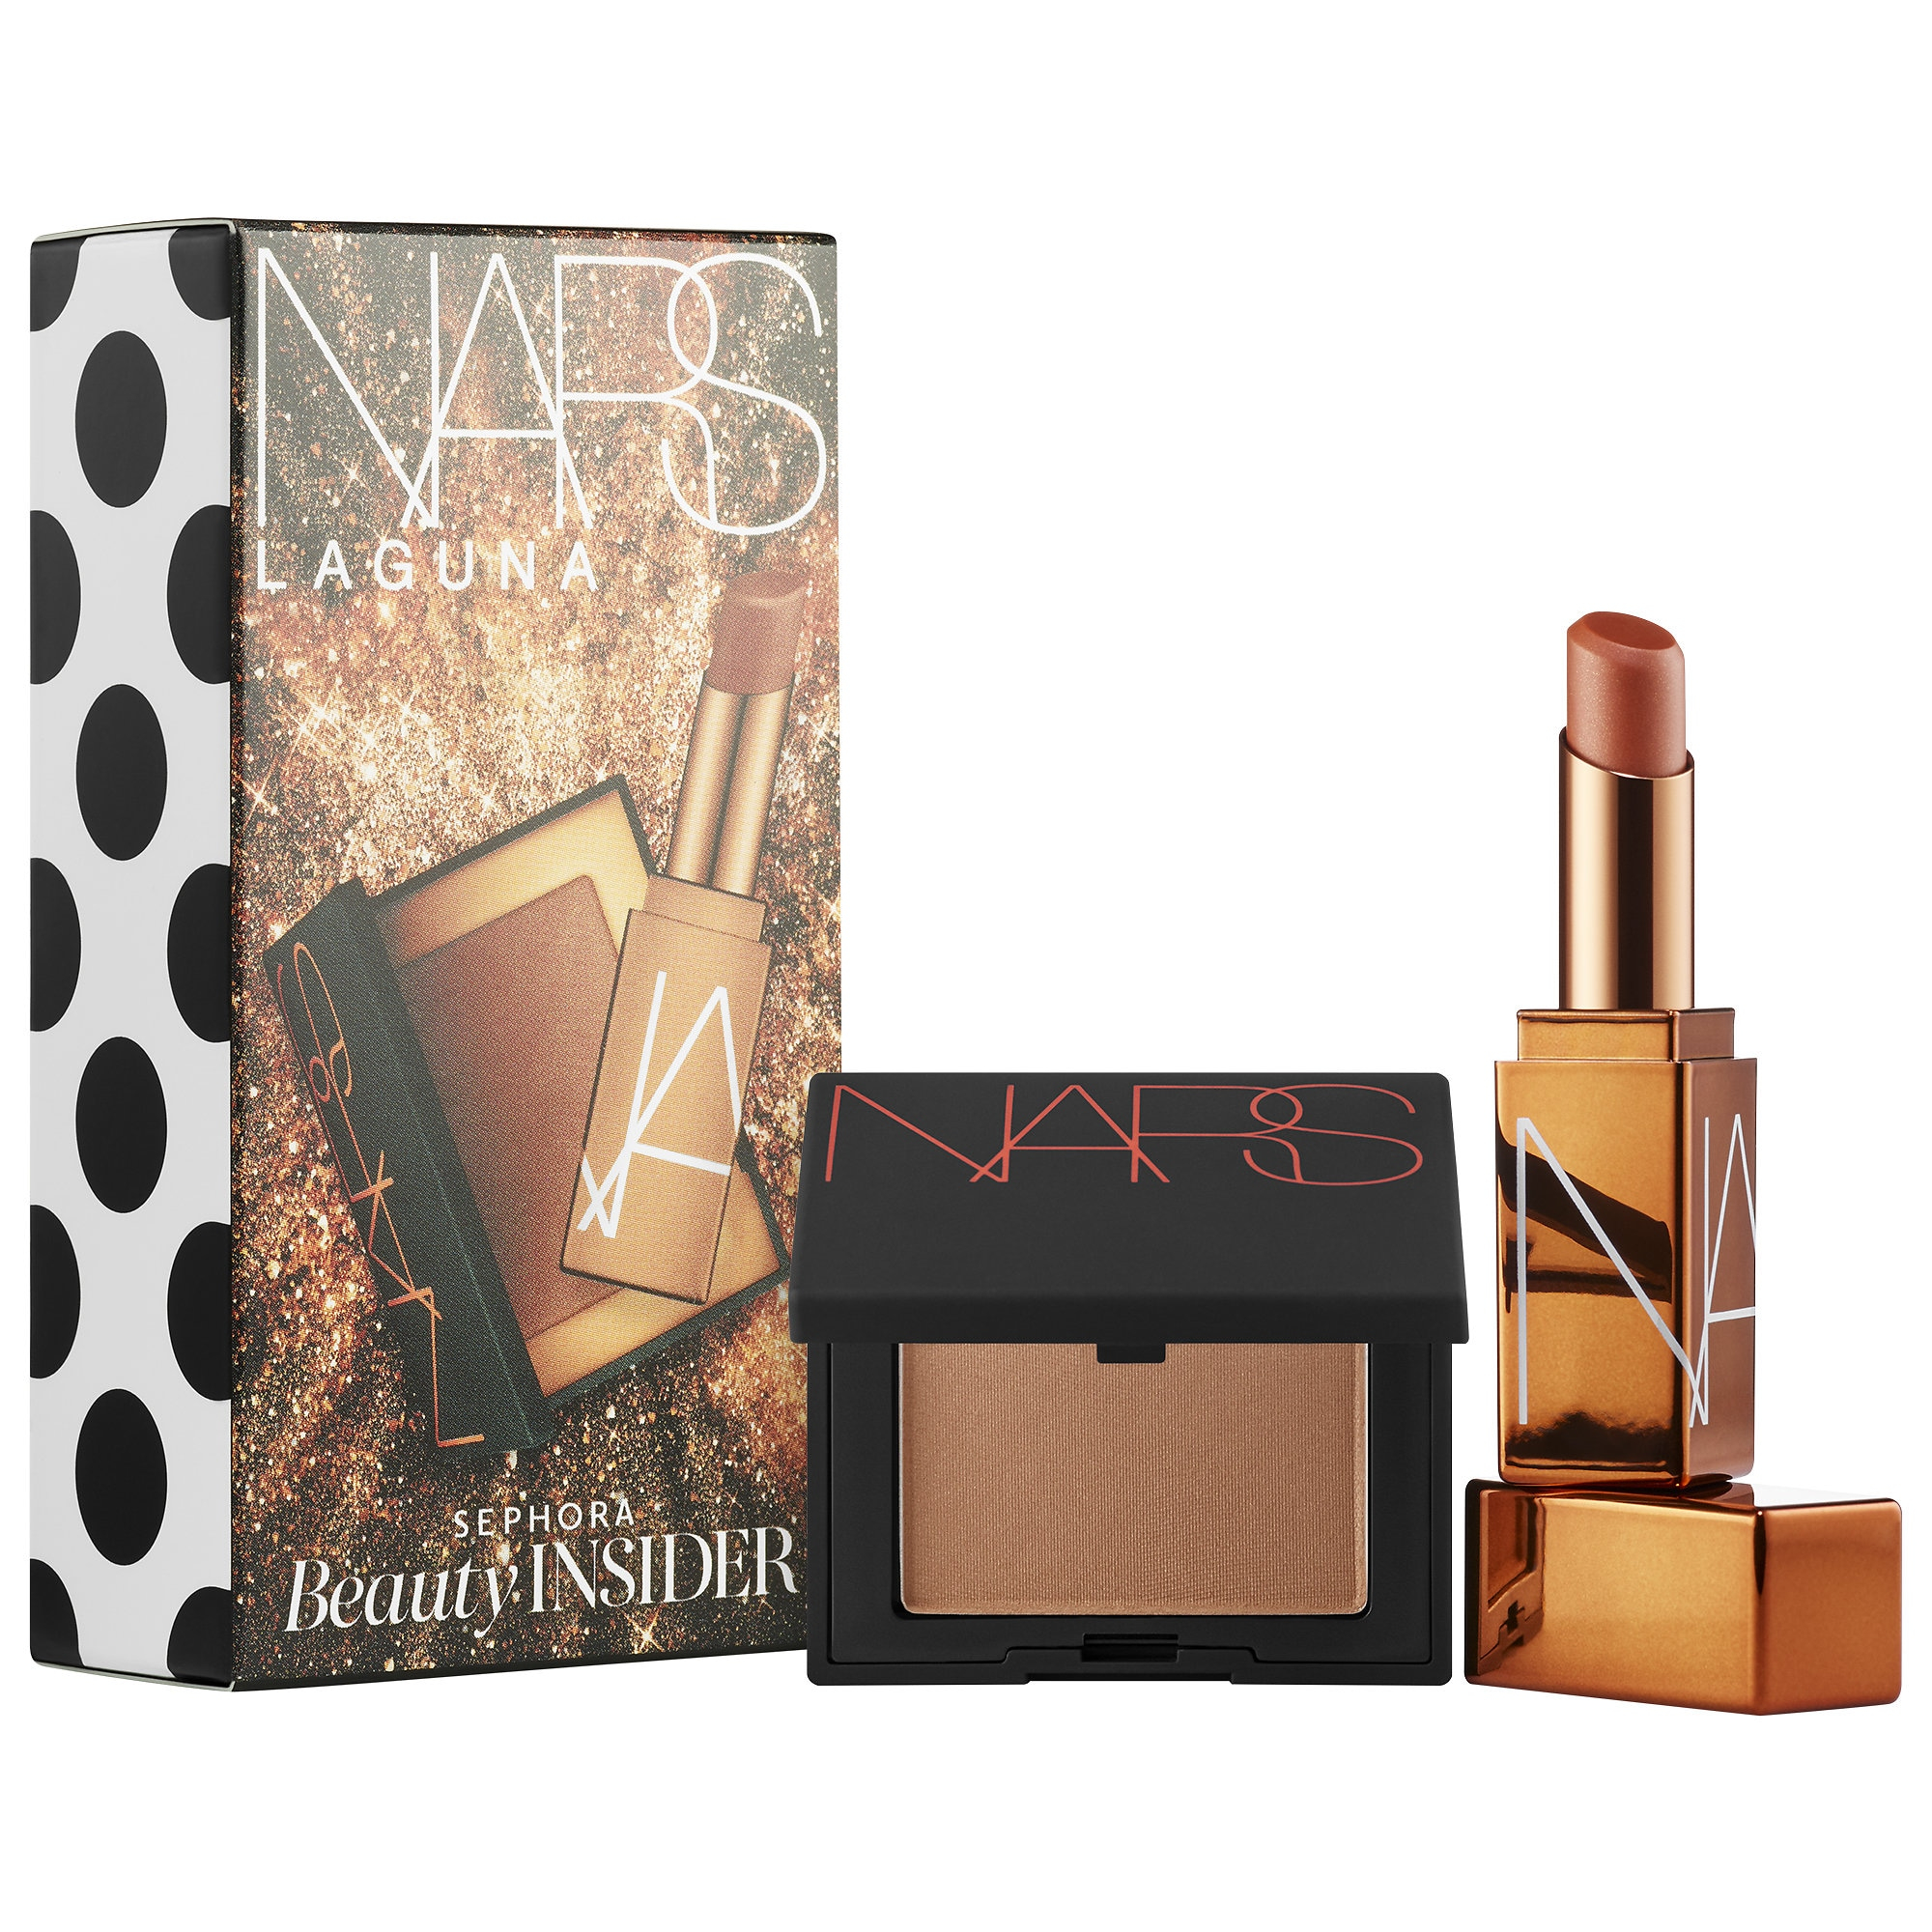 Sephora Reveals New Beauty Insider Birthday Gifts for 2022, Including Laura Mercier, Tatcha, amika – and More!